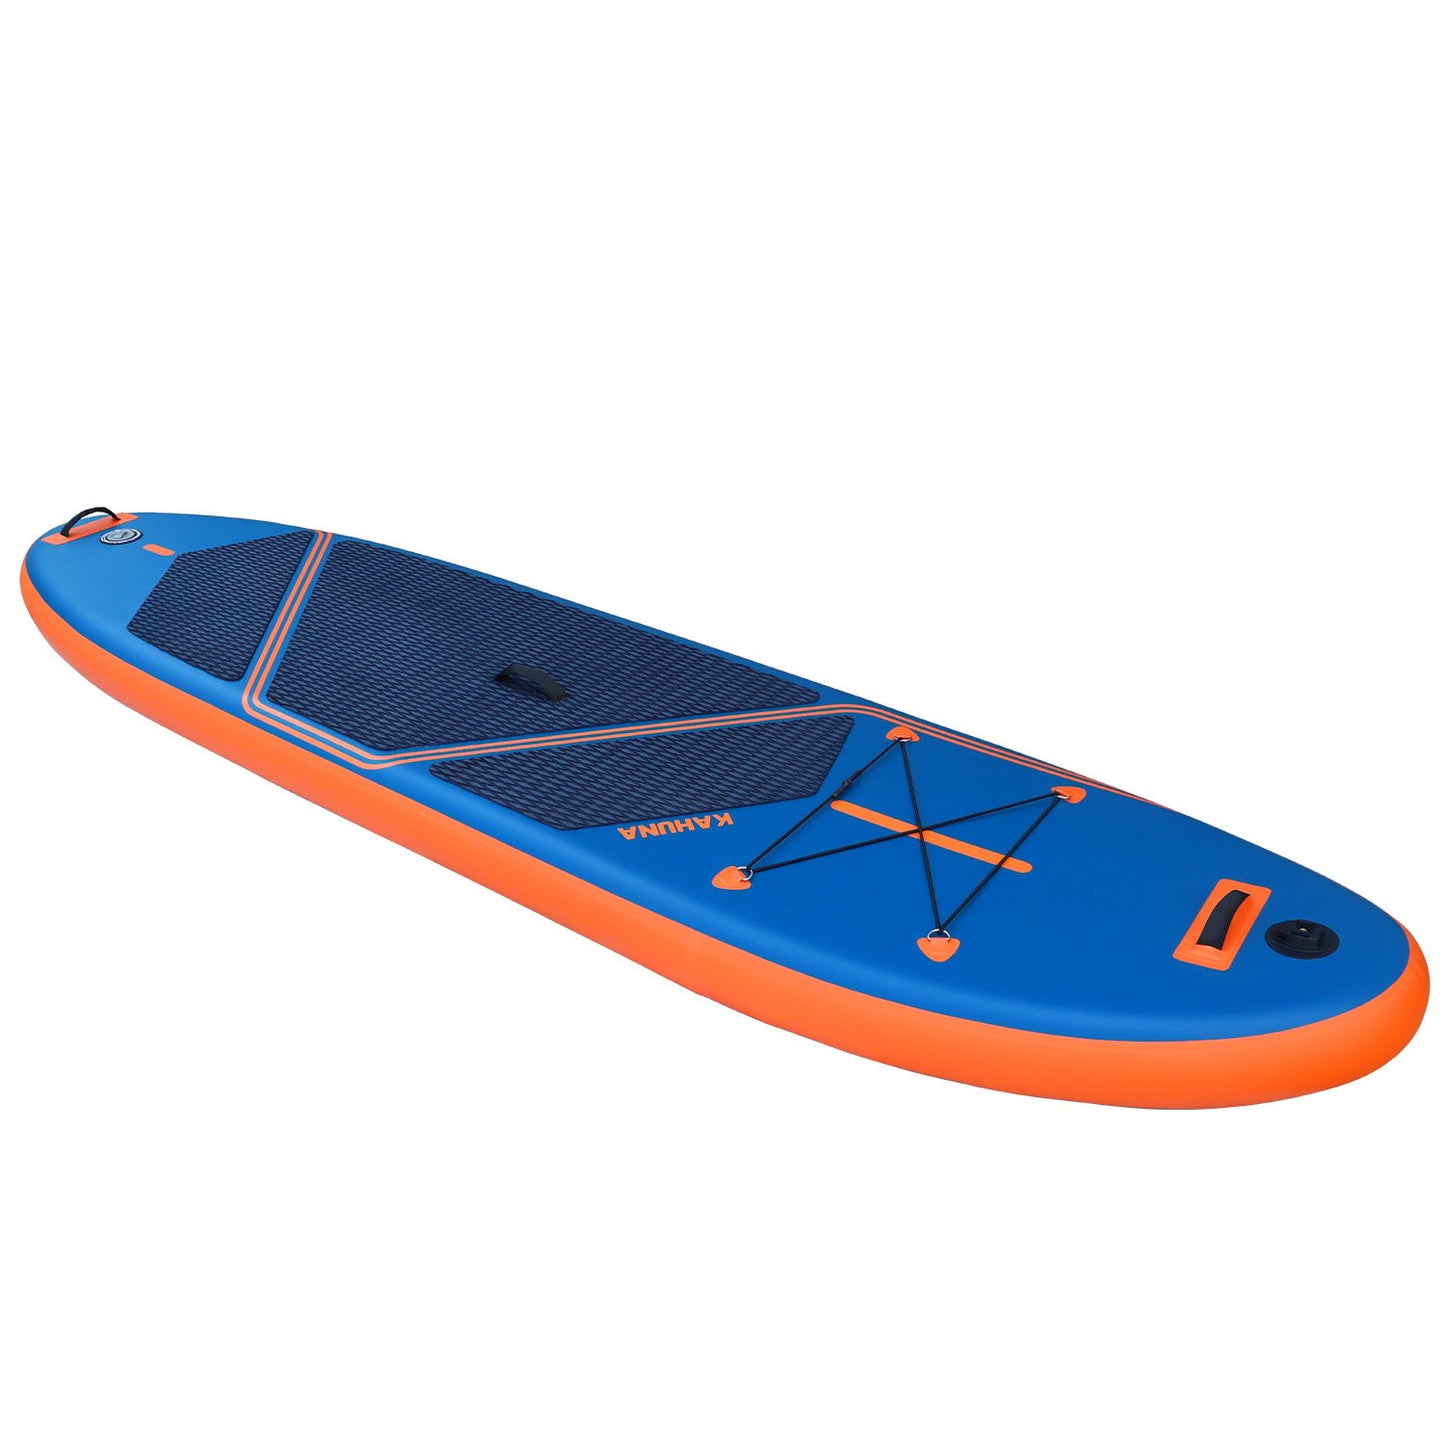 Premium 10.6FT Inflatable Paddle Board for Exciting Watersports Adventures